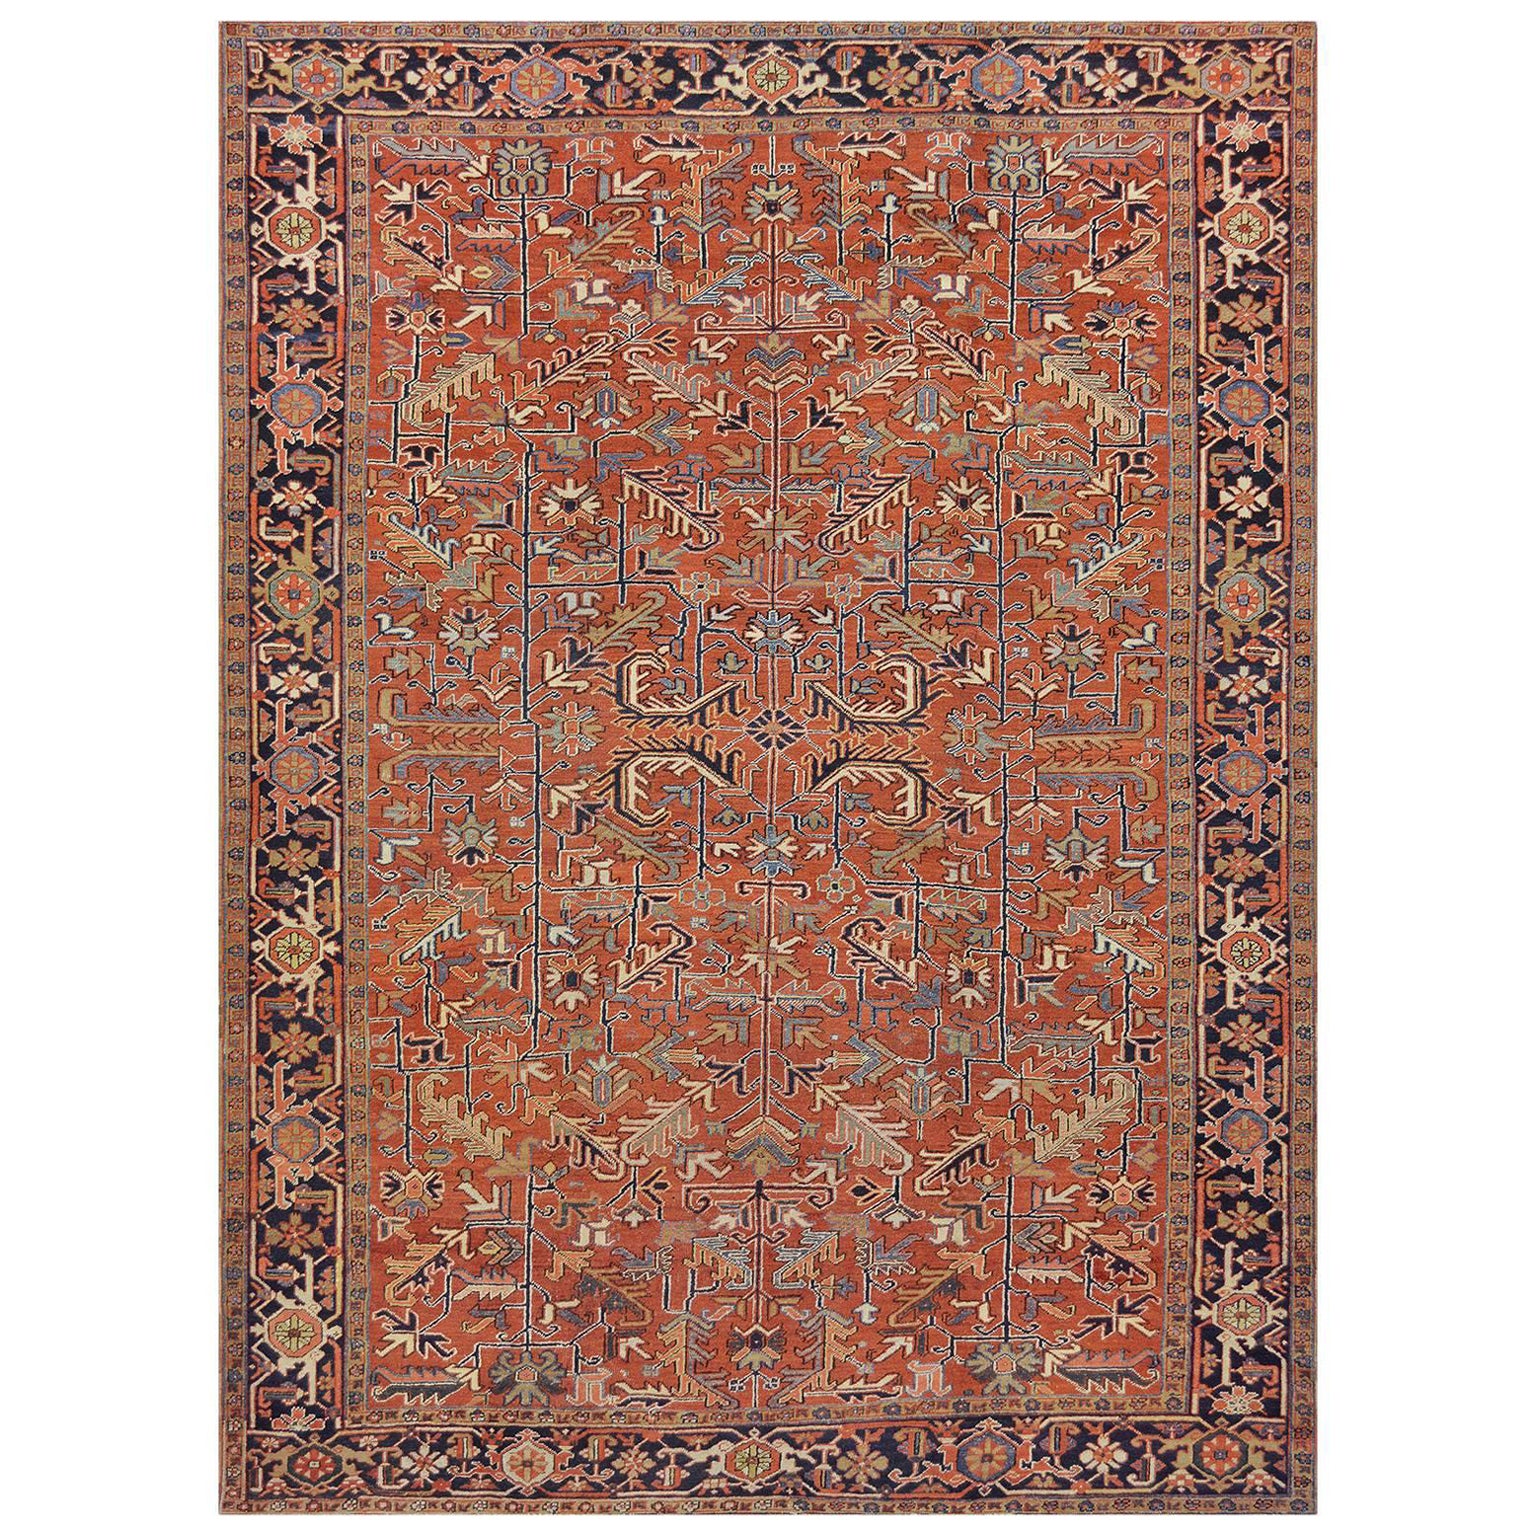 Early 20th Century Wool Heriz Rug from North West Persia